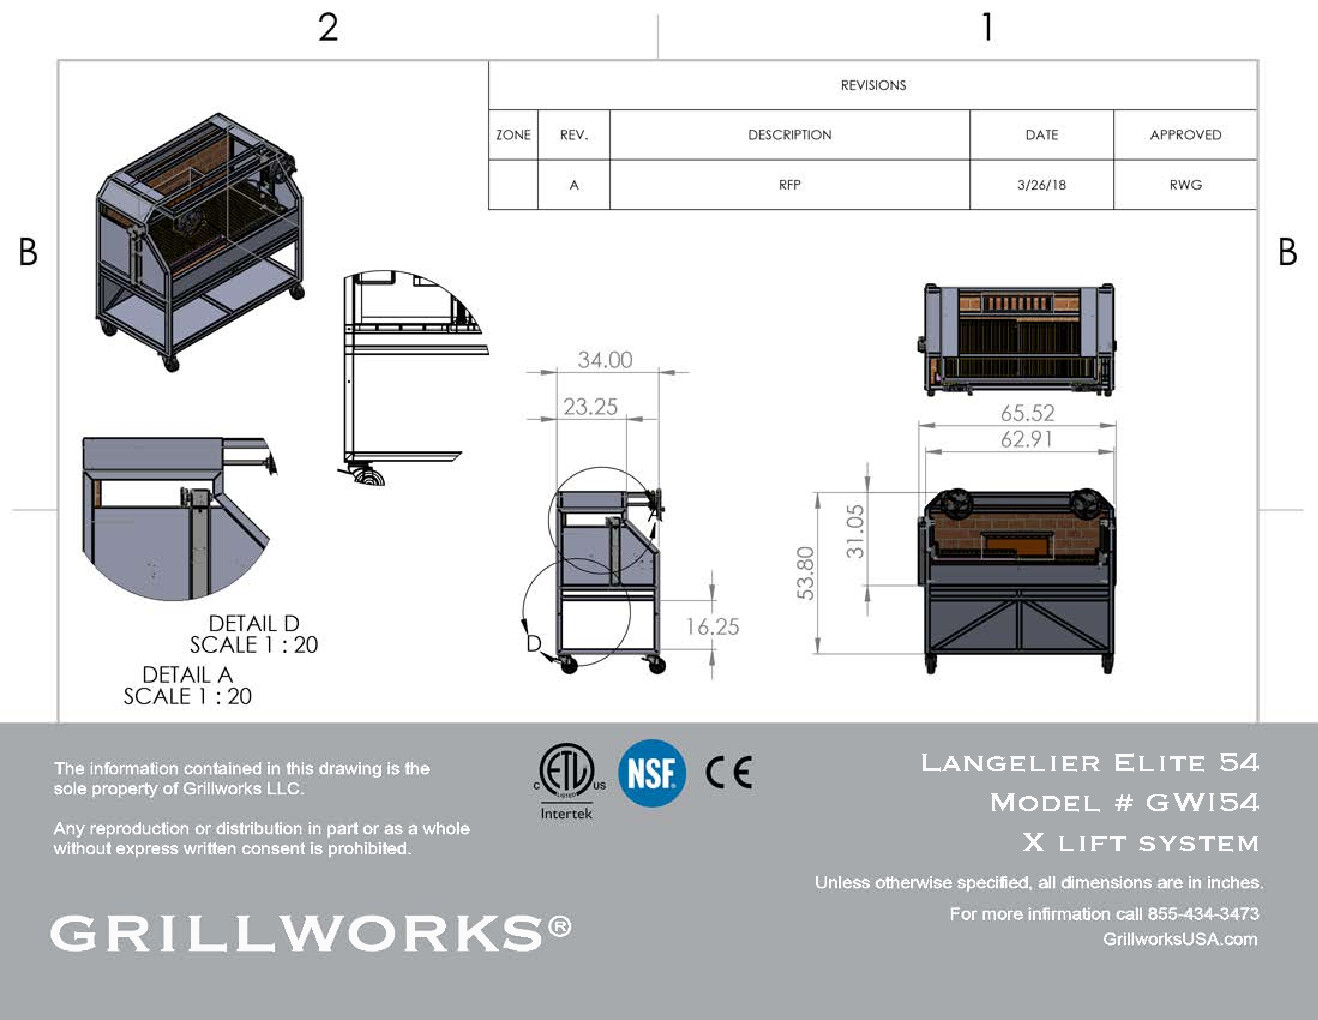 Grillworks GWI54 Wood Burning Charbroiler